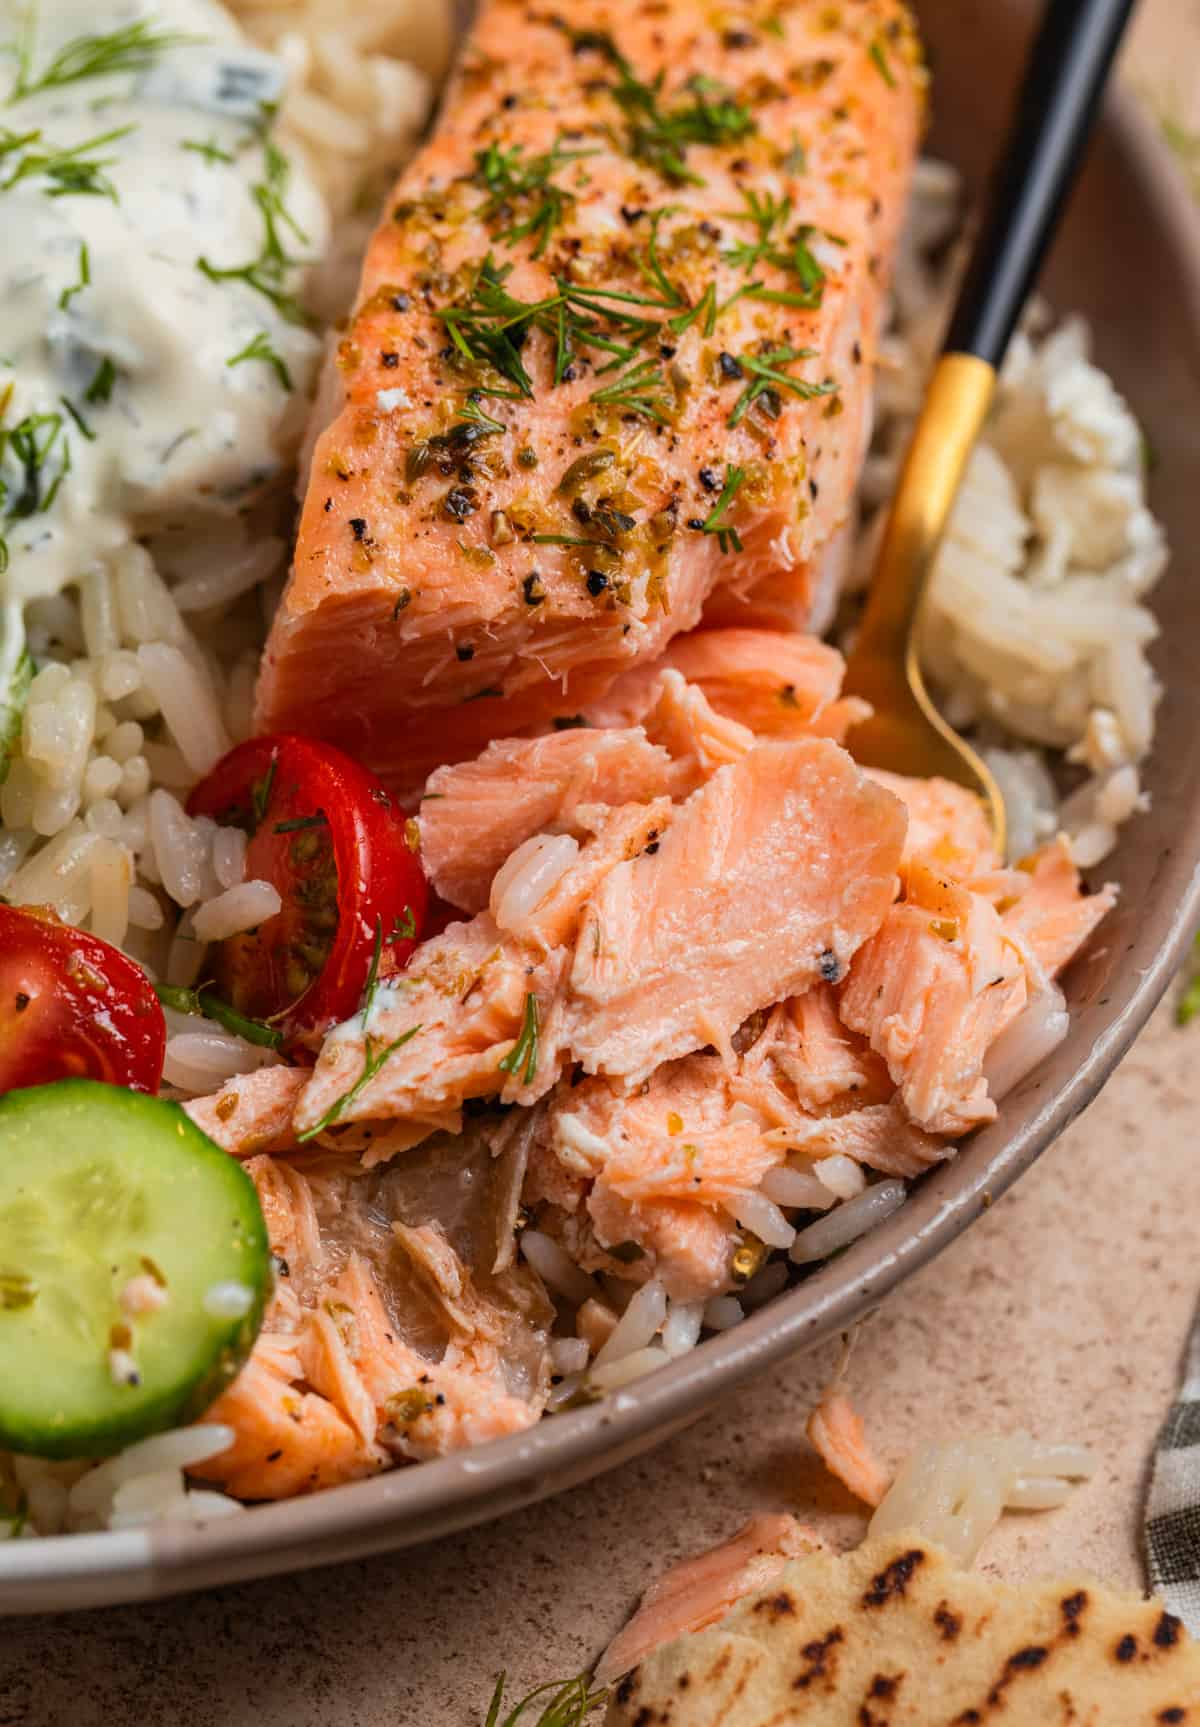 Salmon in dish with rice and veggies with fork and part of the salmon flaked.